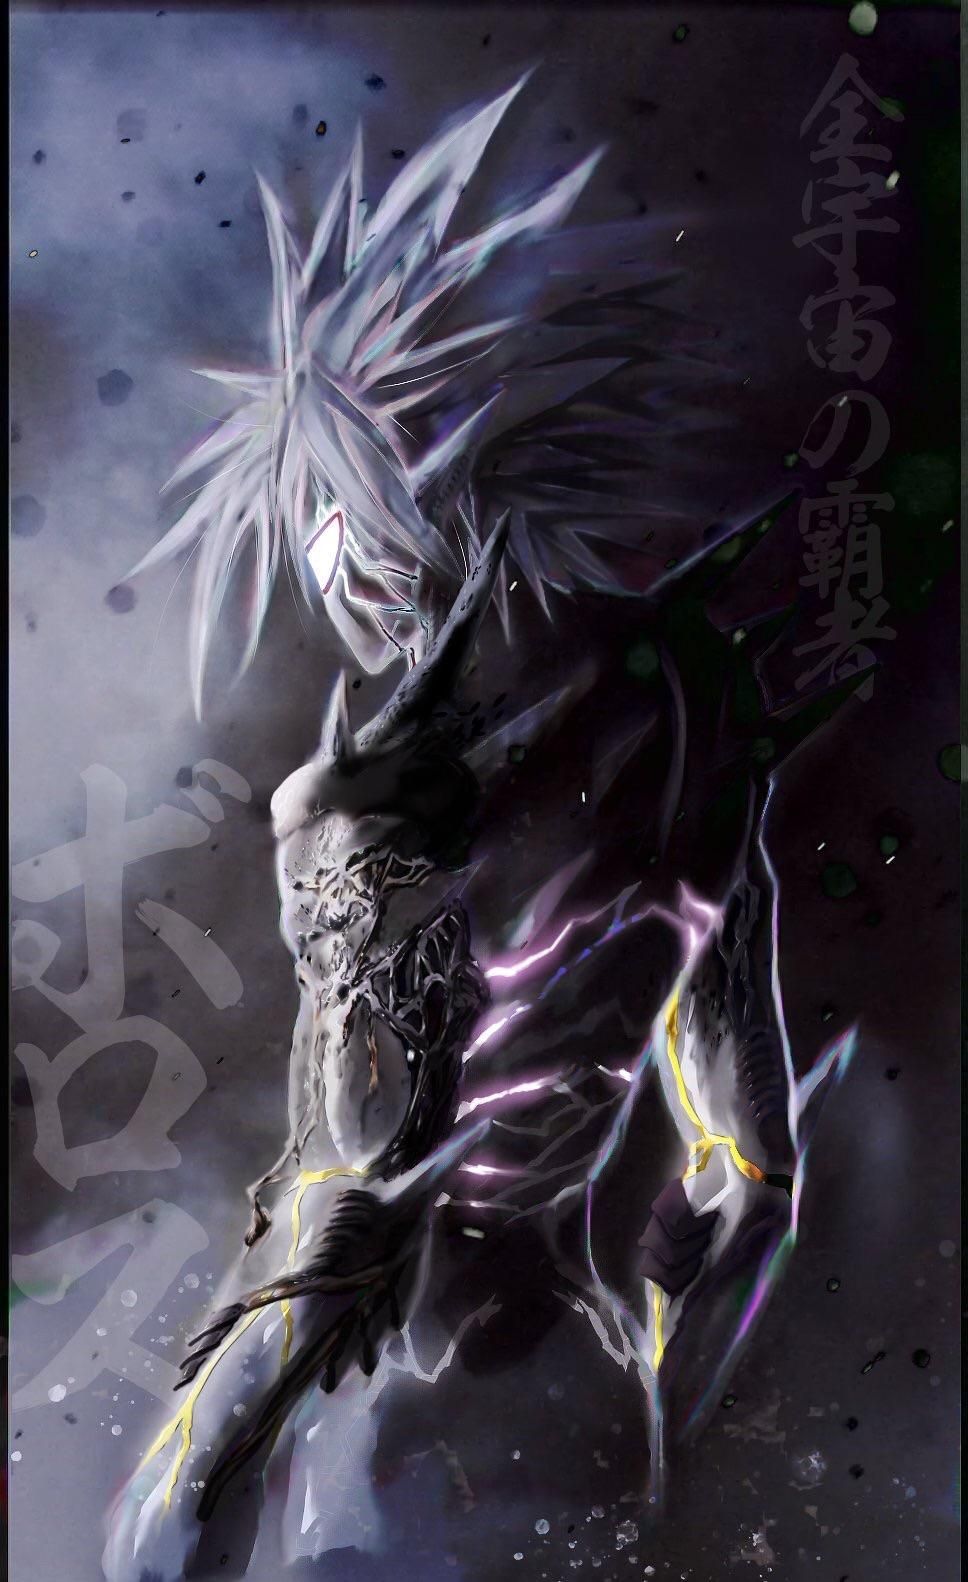 Download Intimidating Lord Boros ready for battle against a cosmic backdrop  Wallpaper